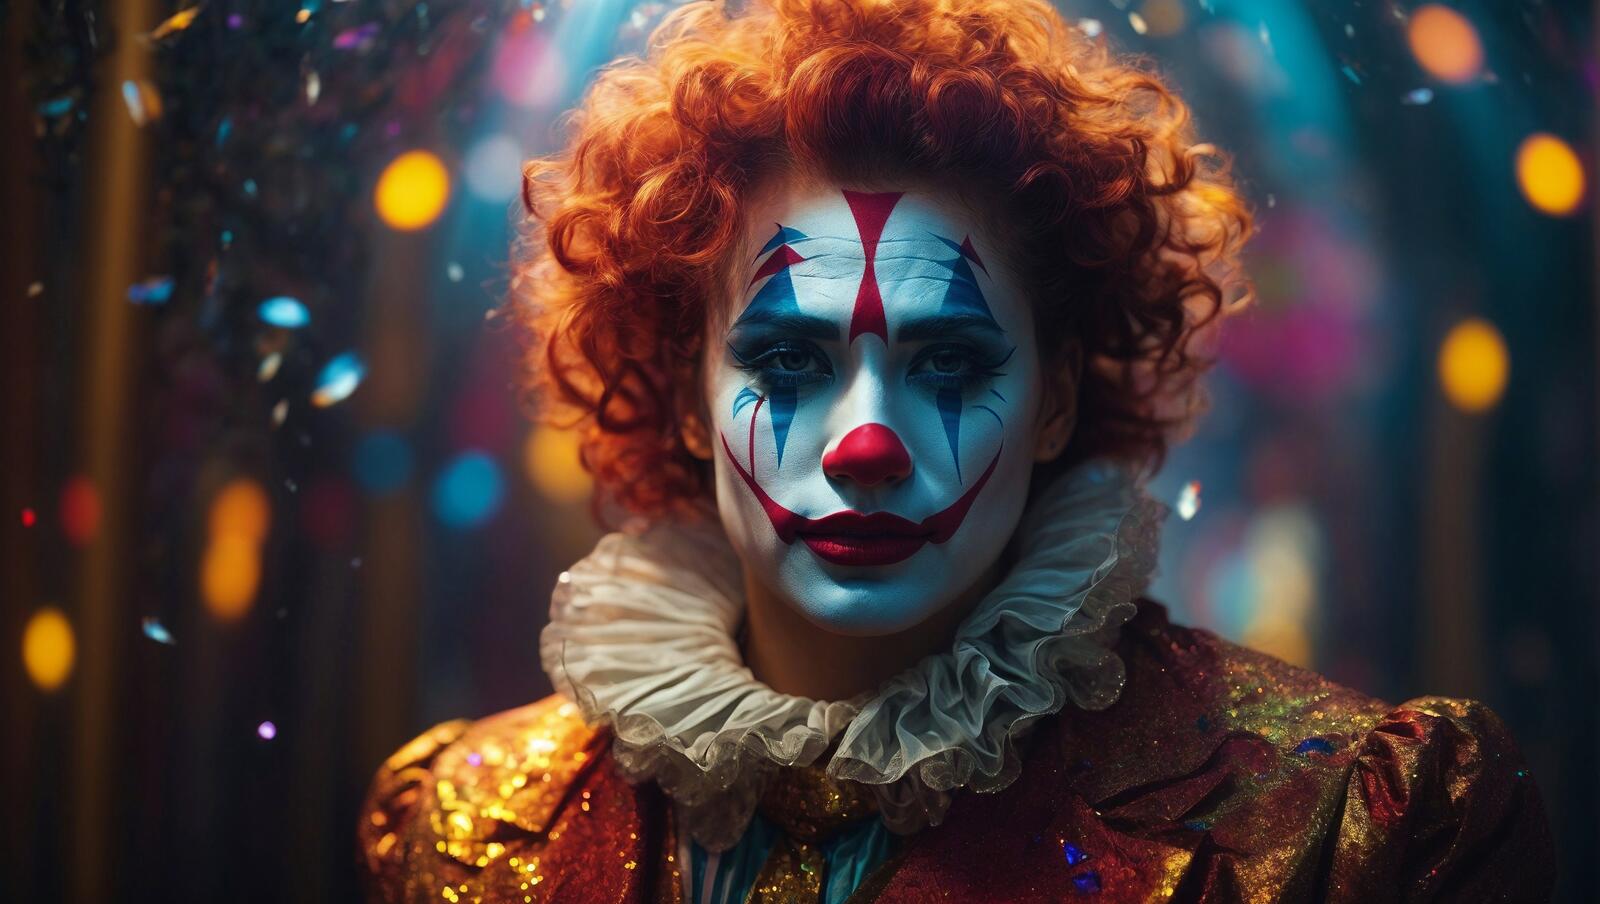 Free photo Image of a clown with clown makeup